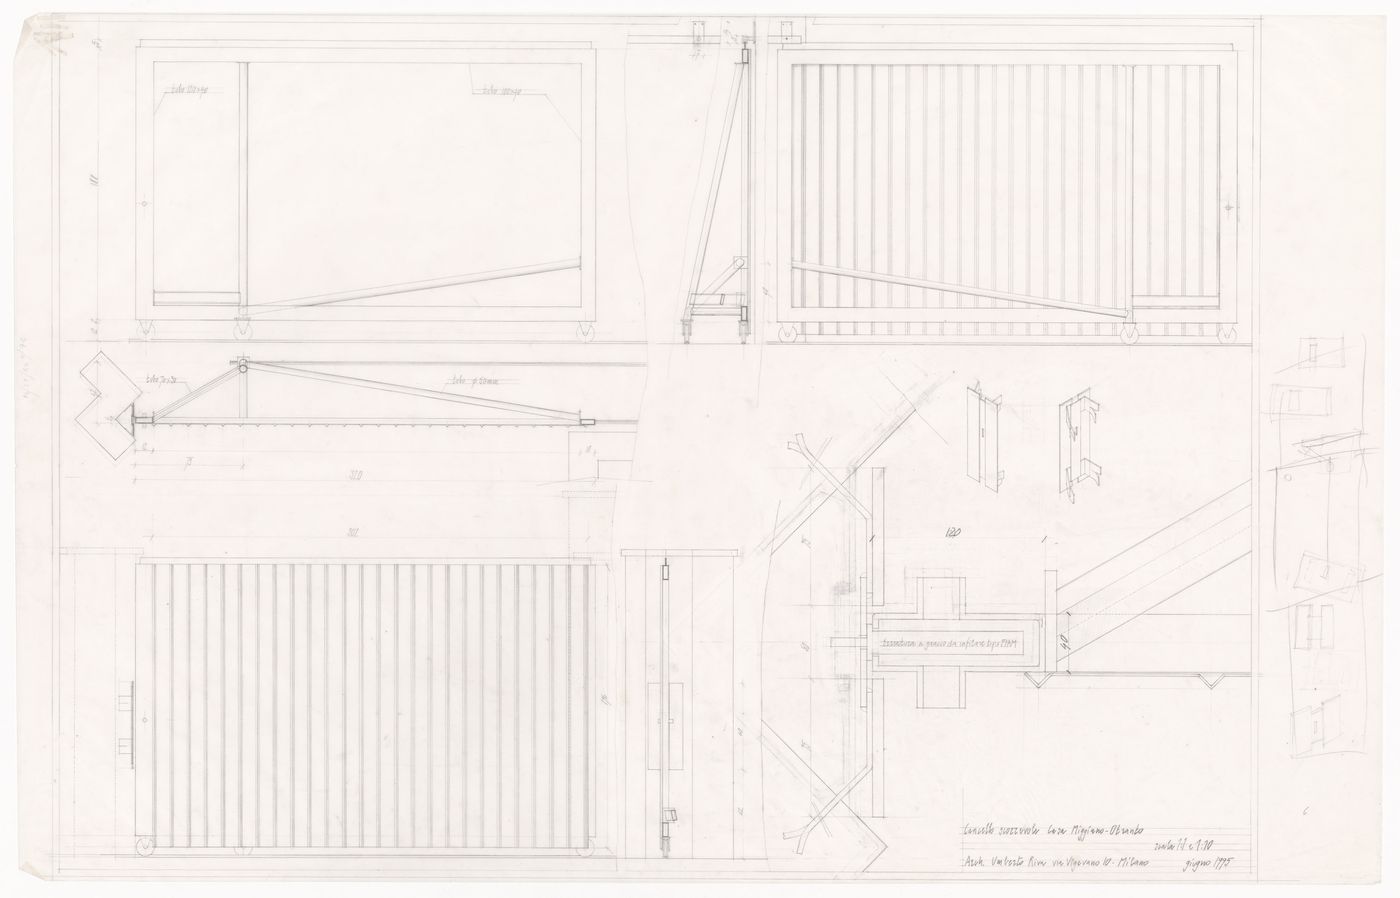 Sliding gate sections and details for Casa Miggiano, Otranto, Italy